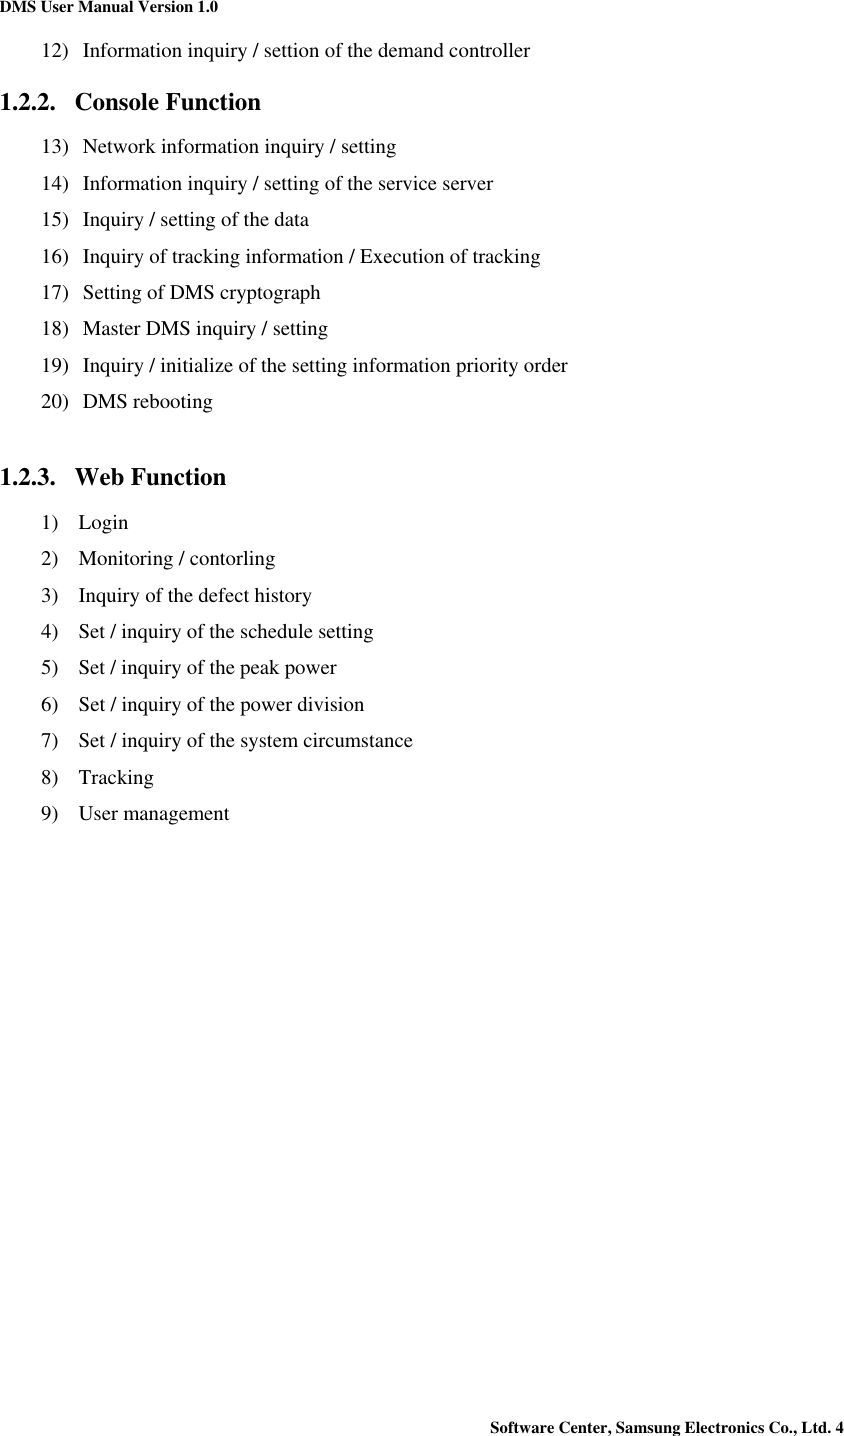 DMS User Manual Version 1.0 Software Center, Samsung Electronics Co., Ltd. 4   12) Information inquiry / settion of the demand controller 1.2.2. Console Function 13) Network information inquiry / setting 14) Information inquiry / setting of the service server 15) Inquiry / setting of the data 16) Inquiry of tracking information / Execution of tracking 17) Setting of DMS cryptograph 18) Master DMS inquiry / setting 19) Inquiry / initialize of the setting information priority order 20) DMS rebooting  1.2.3. Web Function 1) Login 2) Monitoring / contorling 3) Inquiry of the defect history 4) Set / inquiry of the schedule setting 5) Set / inquiry of the peak power   6) Set / inquiry of the power division 7) Set / inquiry of the system circumstance 8) Tracking 9) User management    